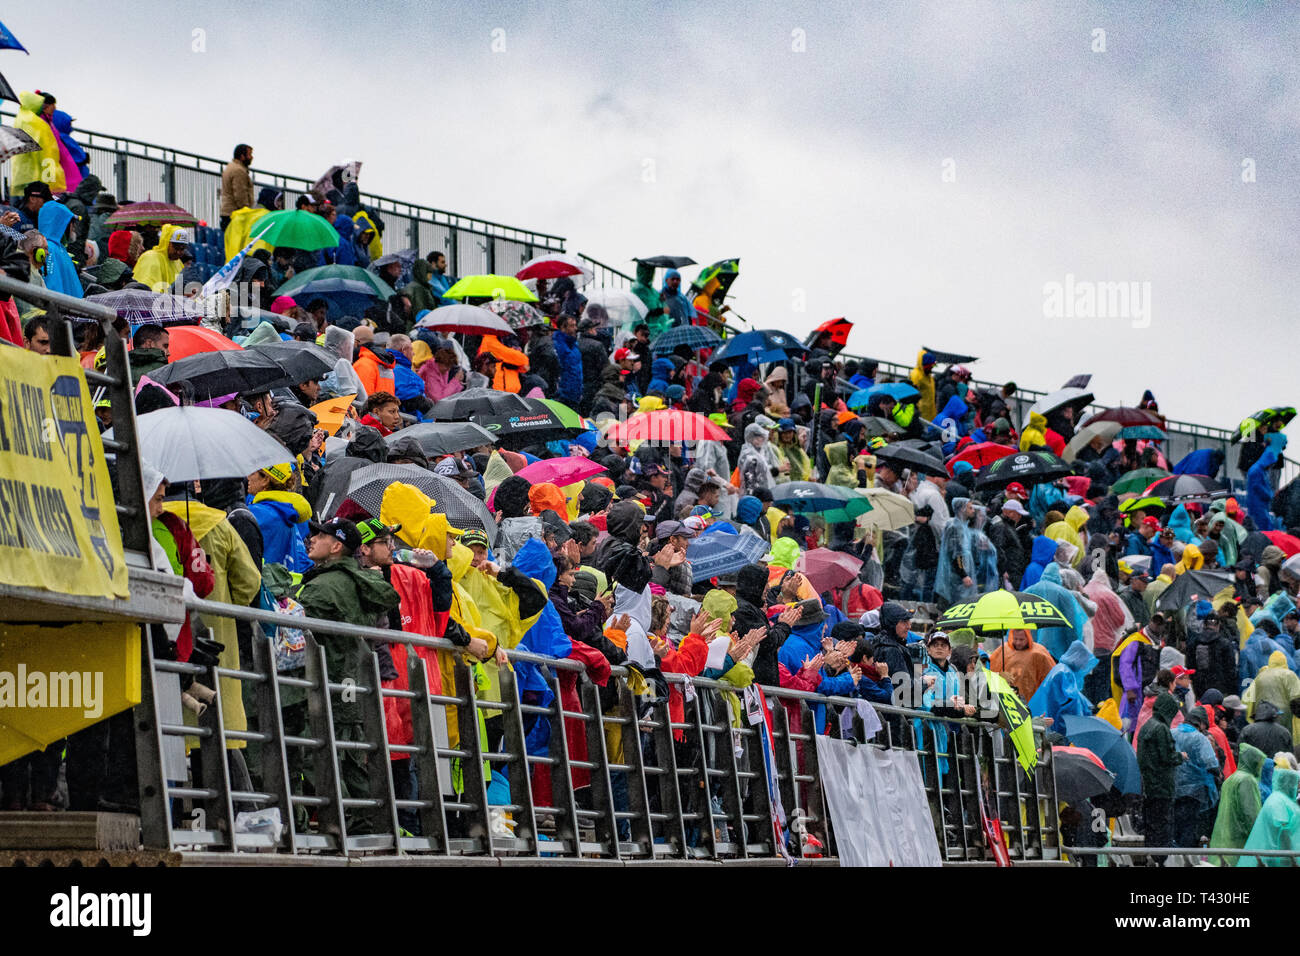 Valencia/Spain - 11/18/2018 - fans prepare to leave as the 2018 Valencia GP came to an end Stock Photo